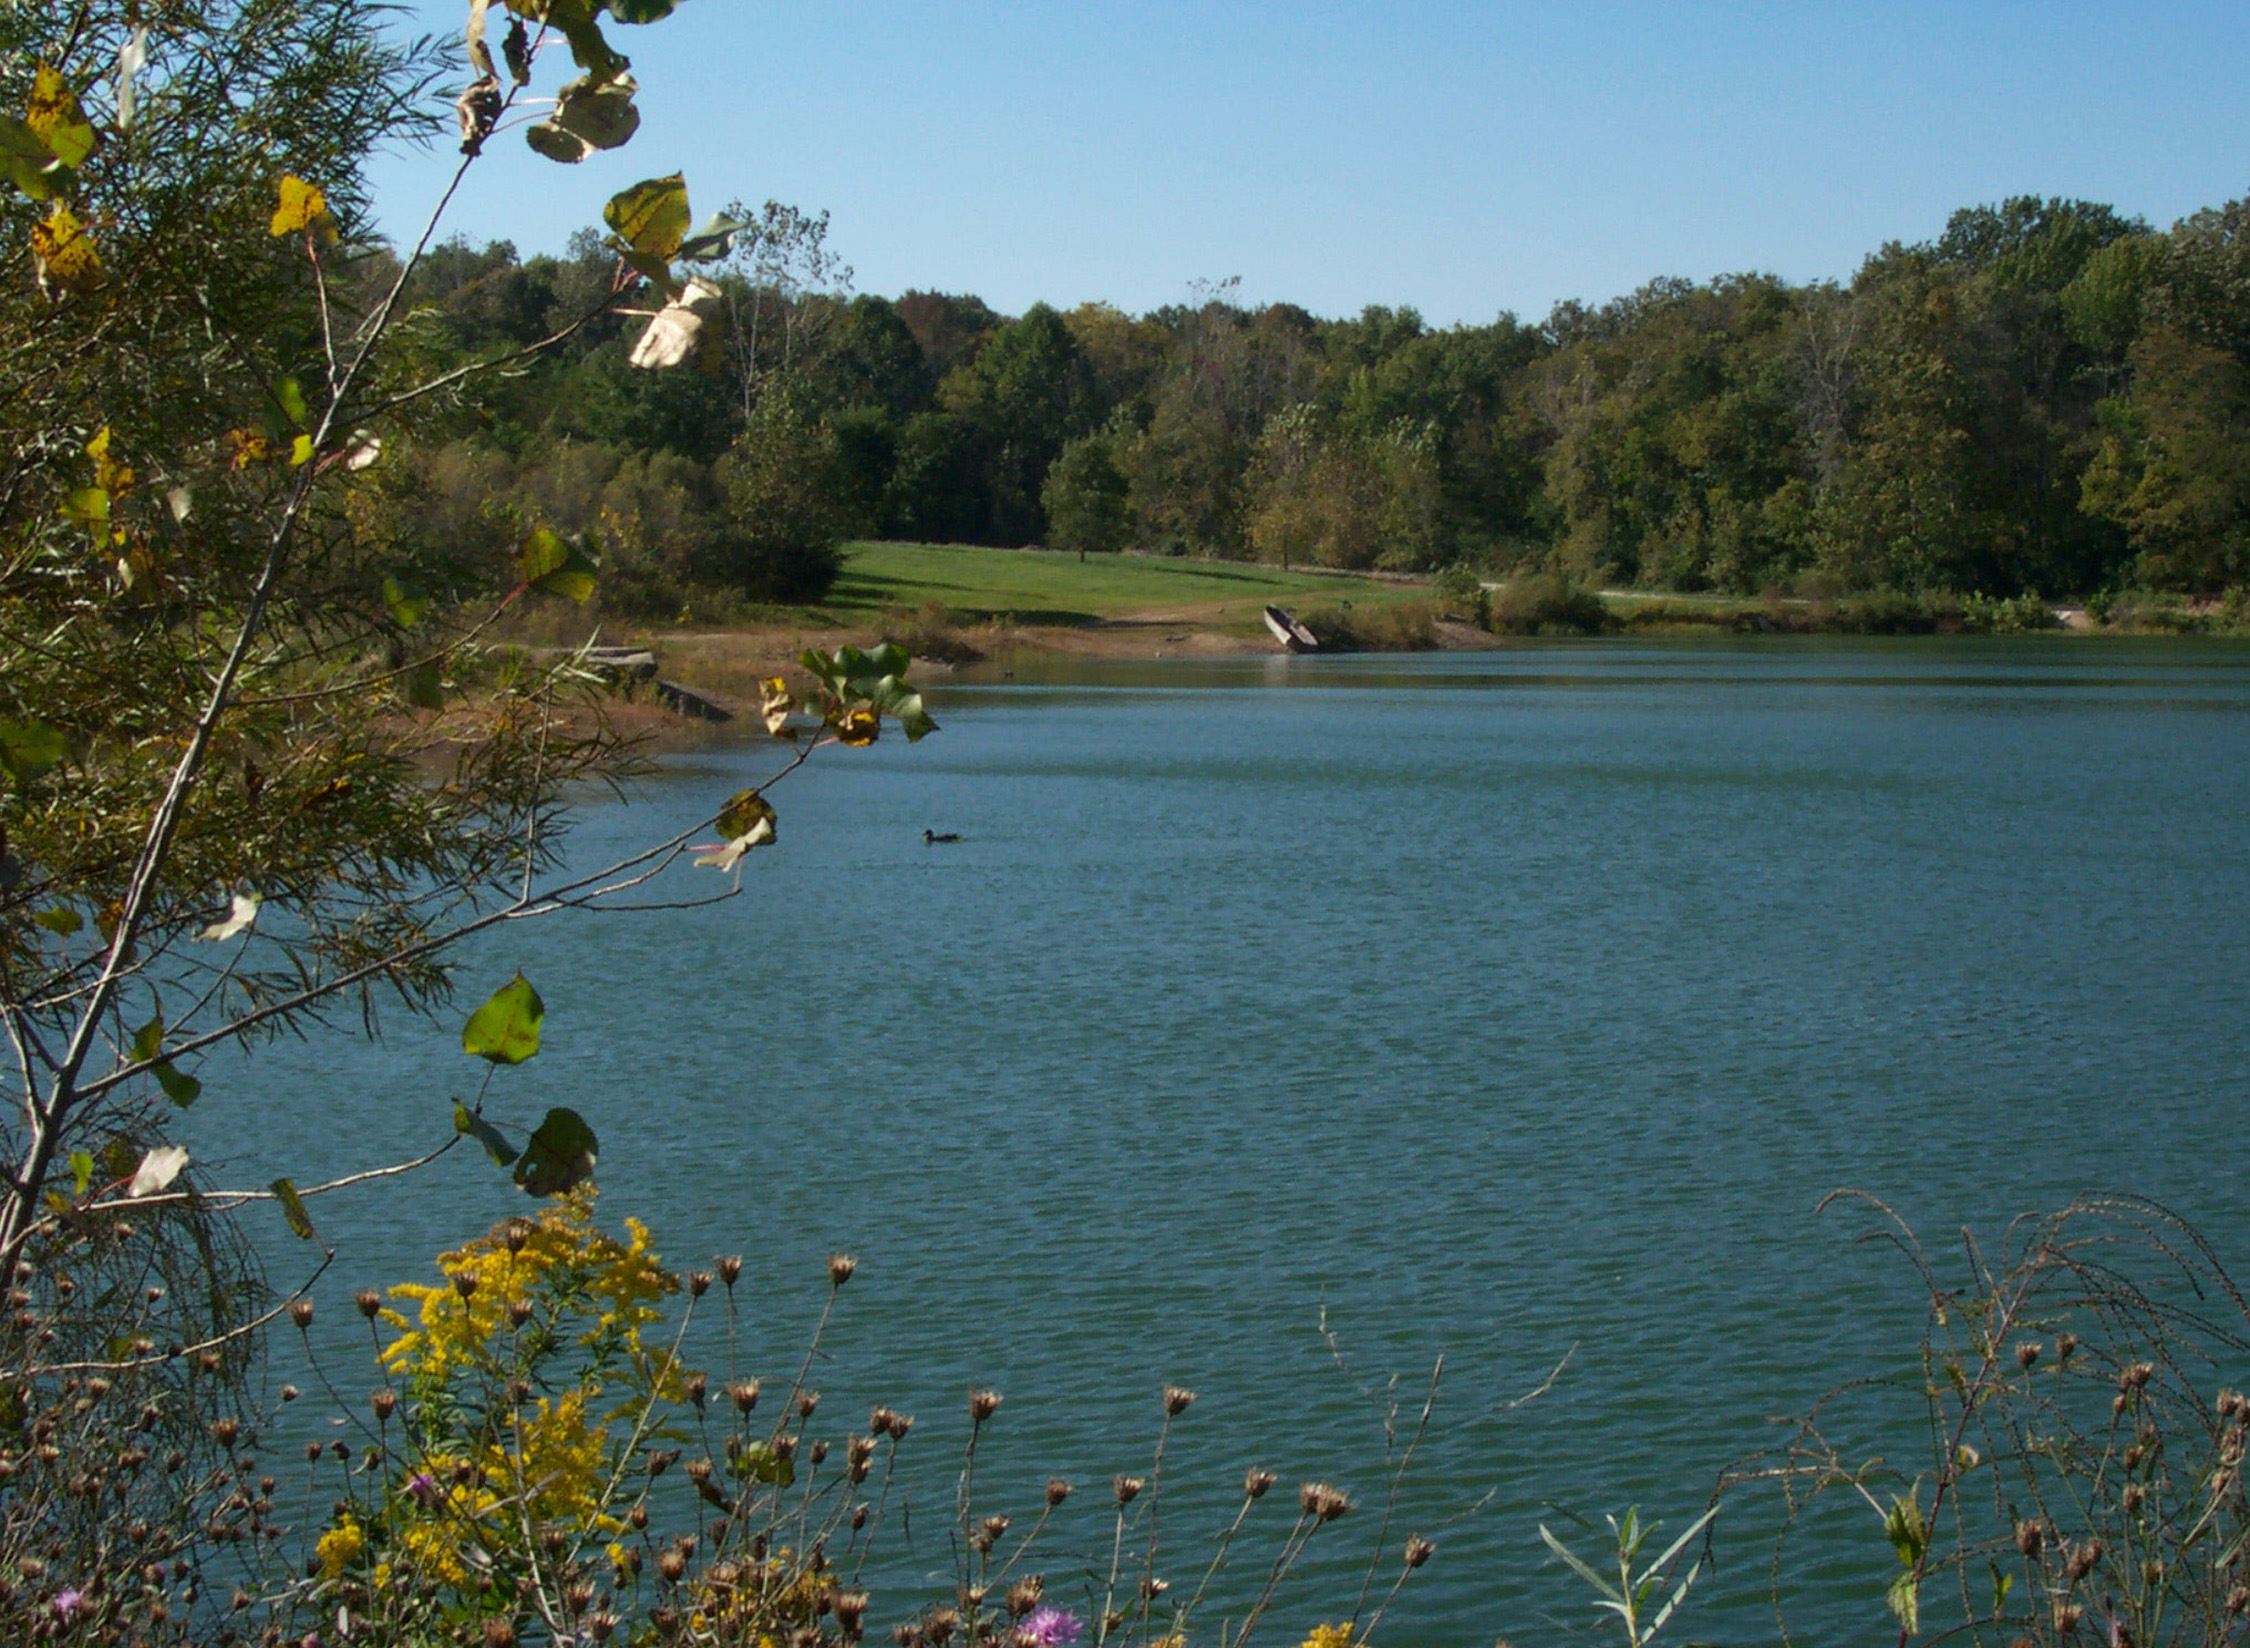 Fishing ponds at Englewood MetroPark.